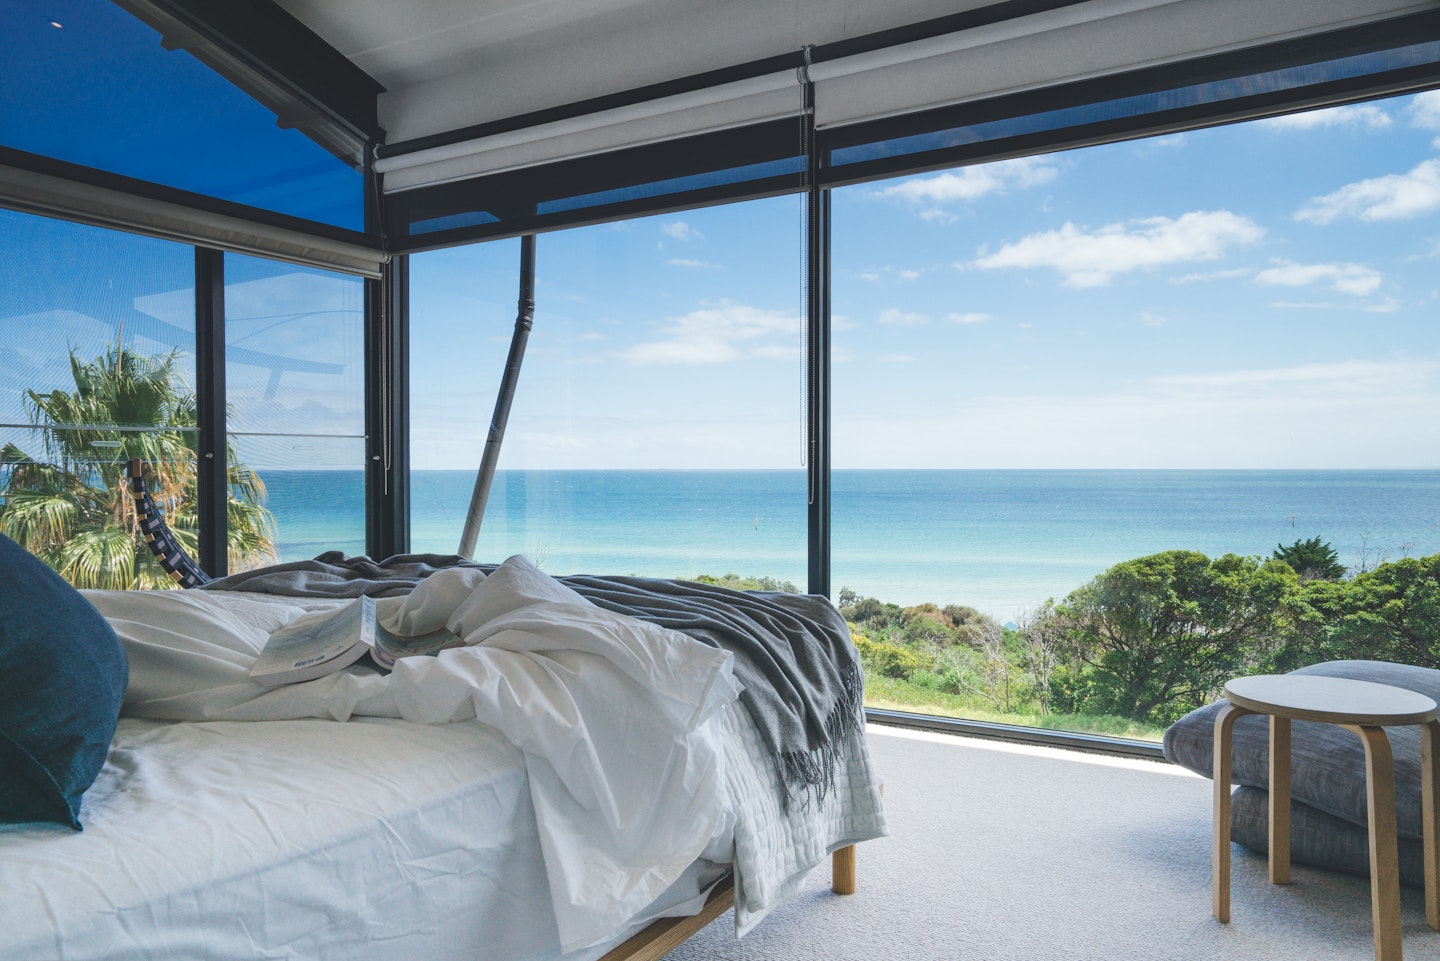 a bed looking out to the ocean